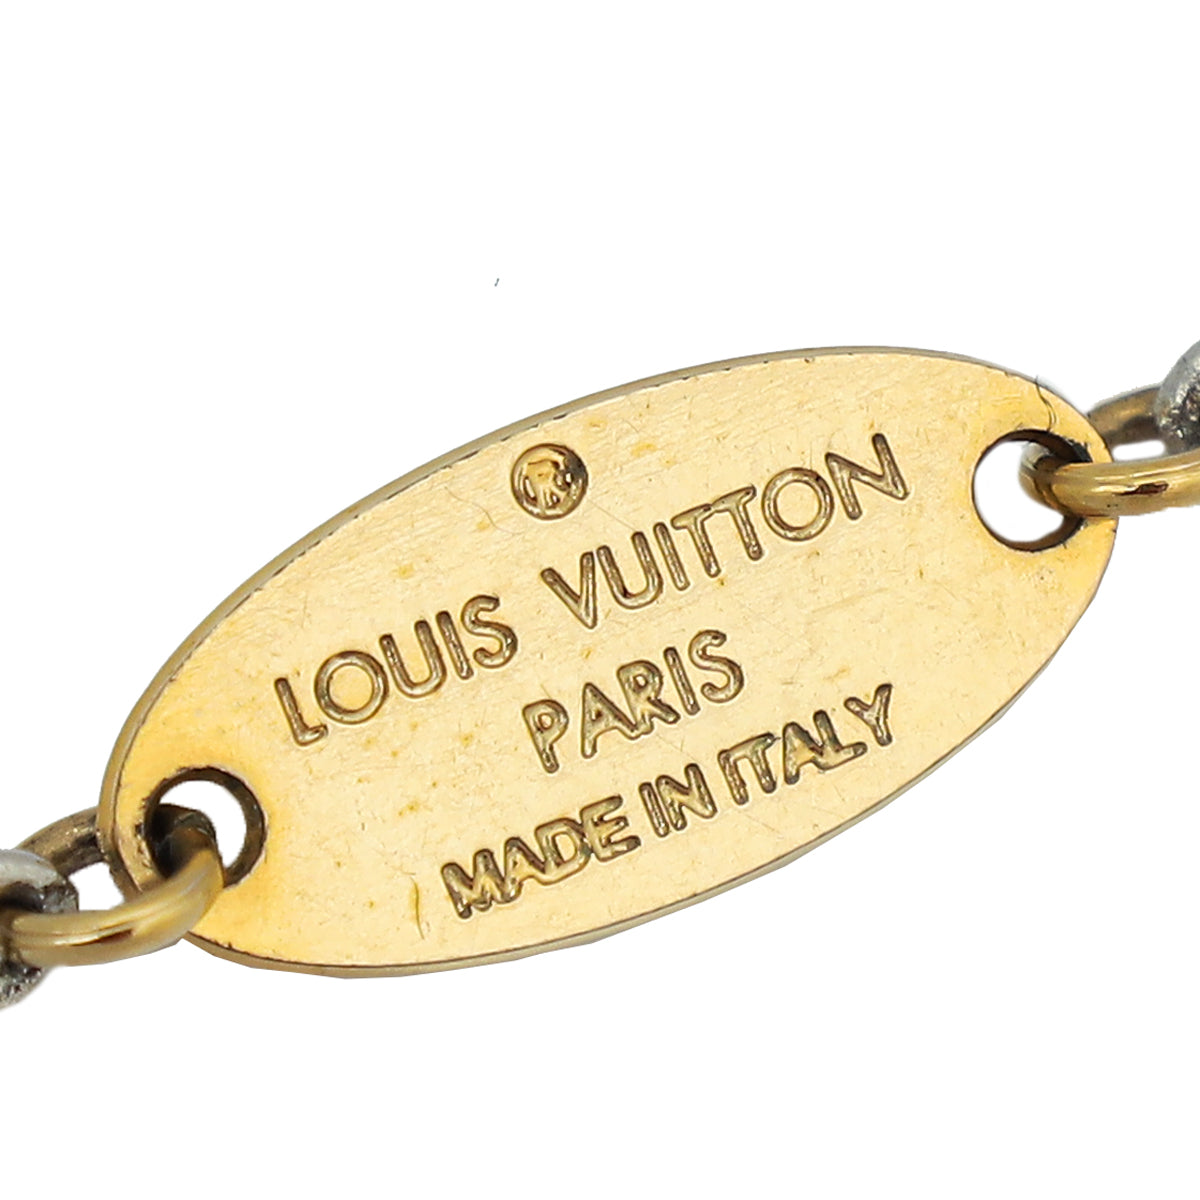 LOUIS VUITTON Logomania necklace, gold-plated metal cha…